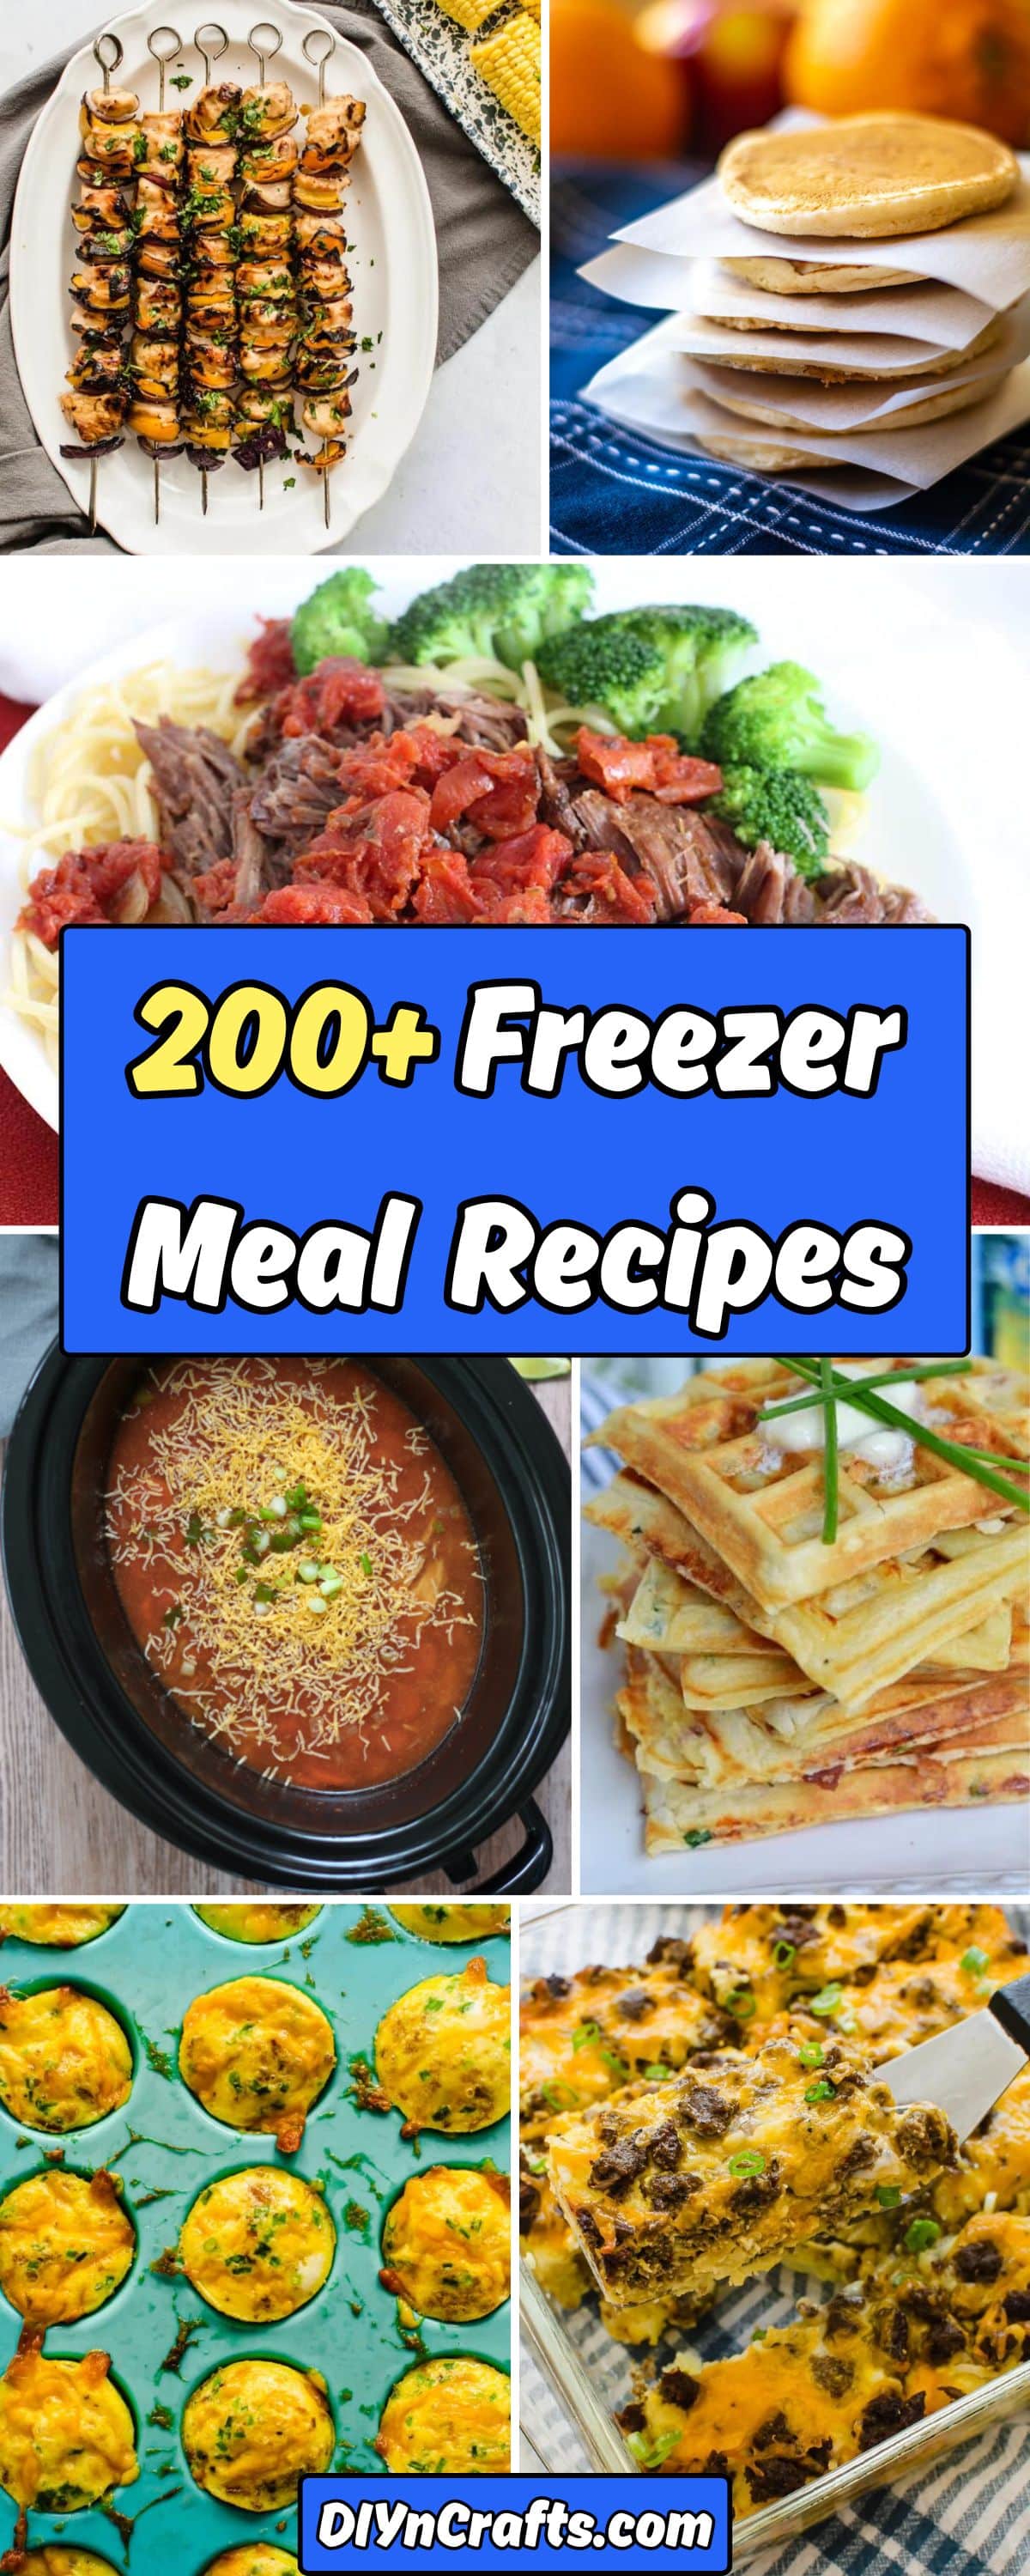 200+ Easy To Make Freezer Meals That Save You Time And Money collage.